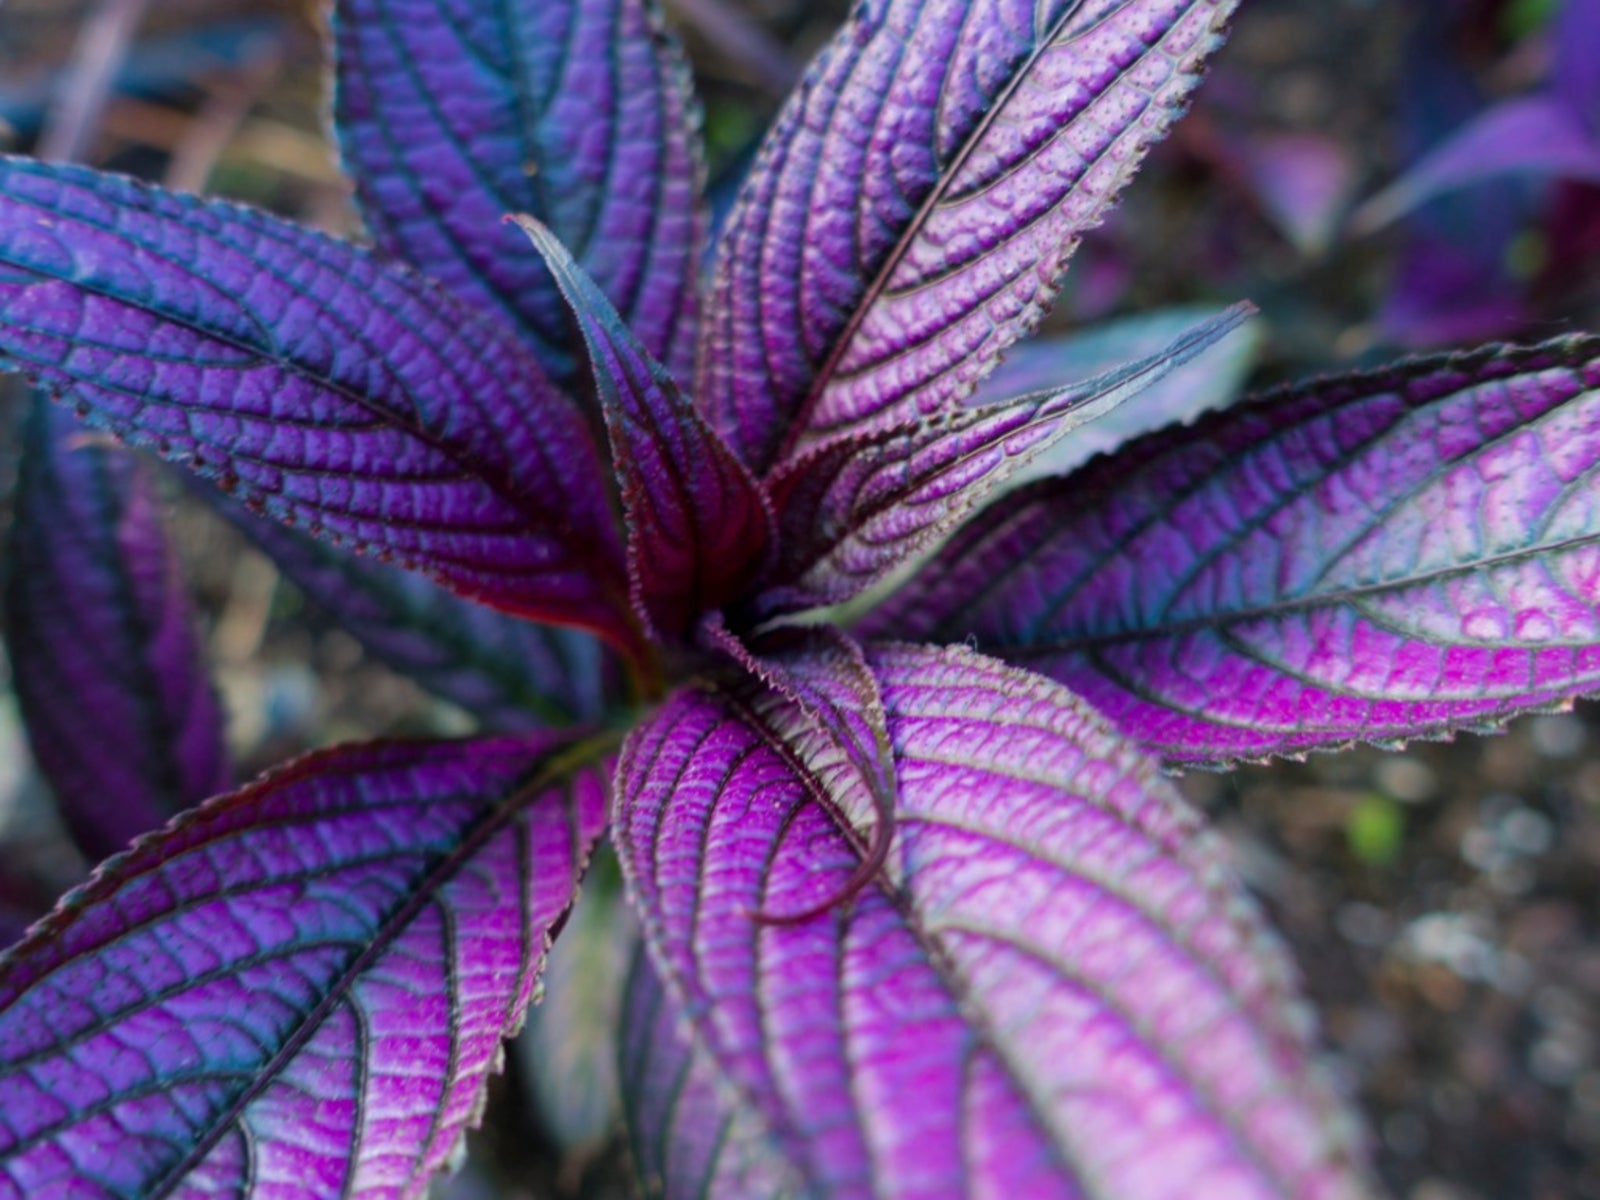 persian shield care instructions - how to grow a persian shield